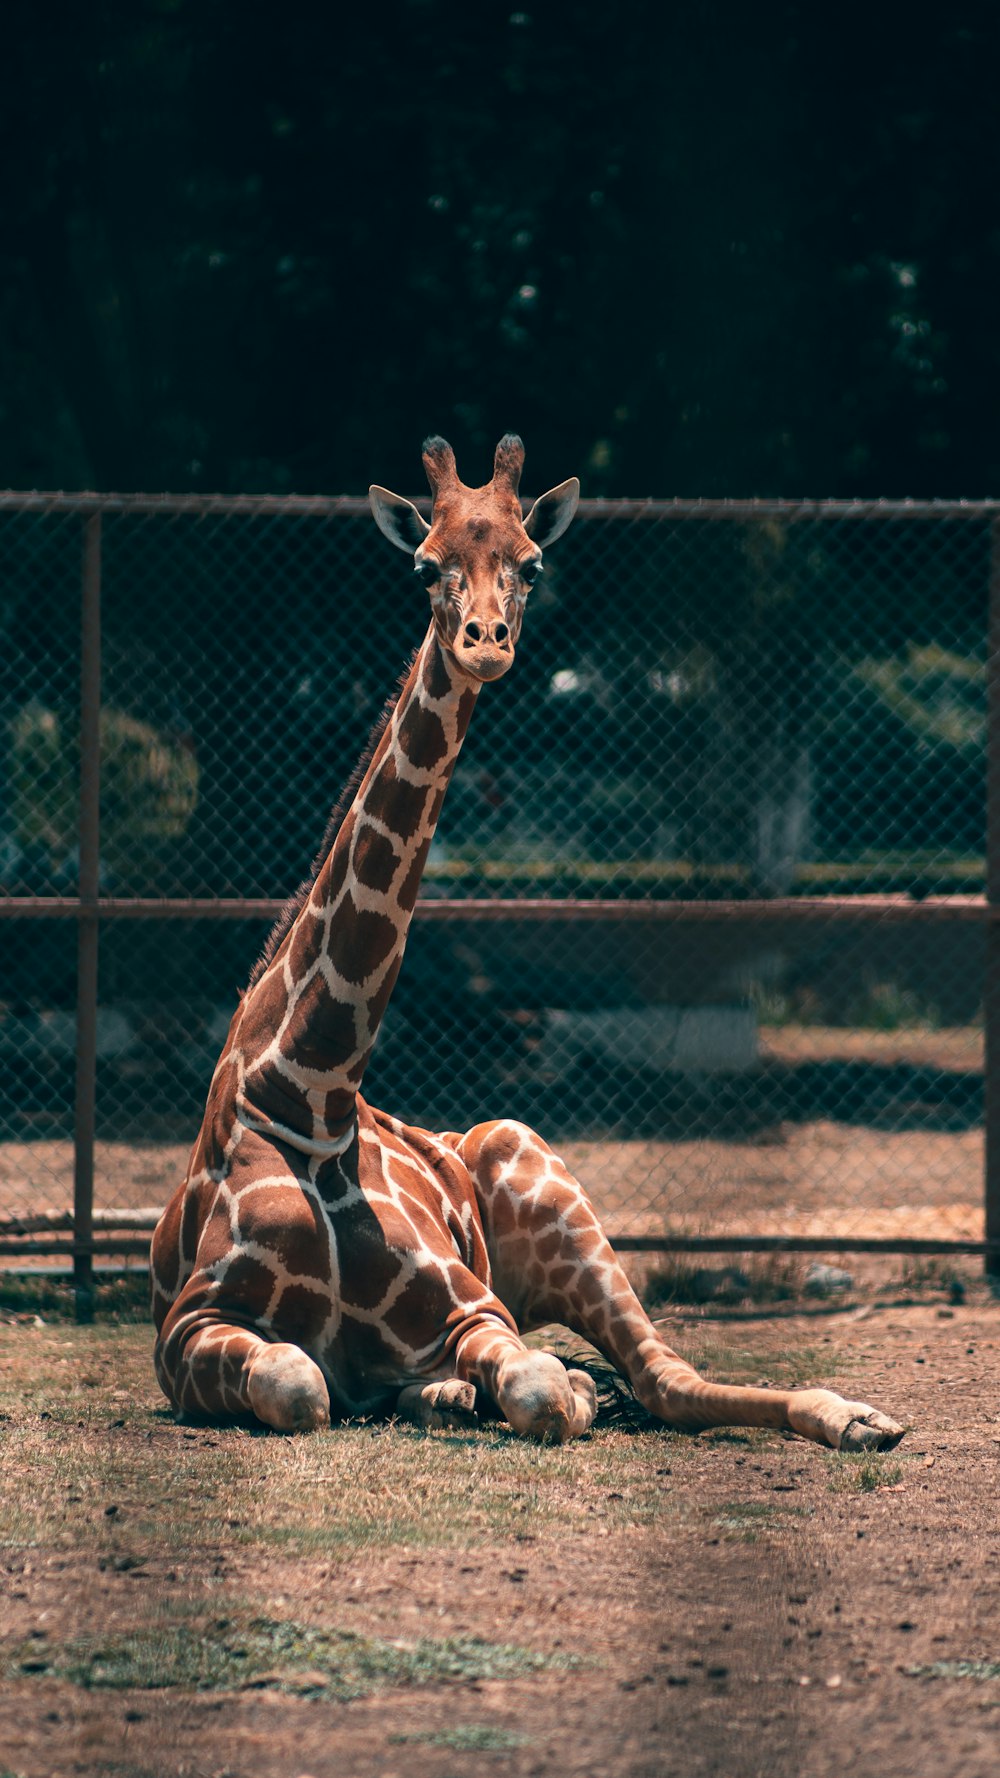 a giraffe sitting on the ground in a fenced in area